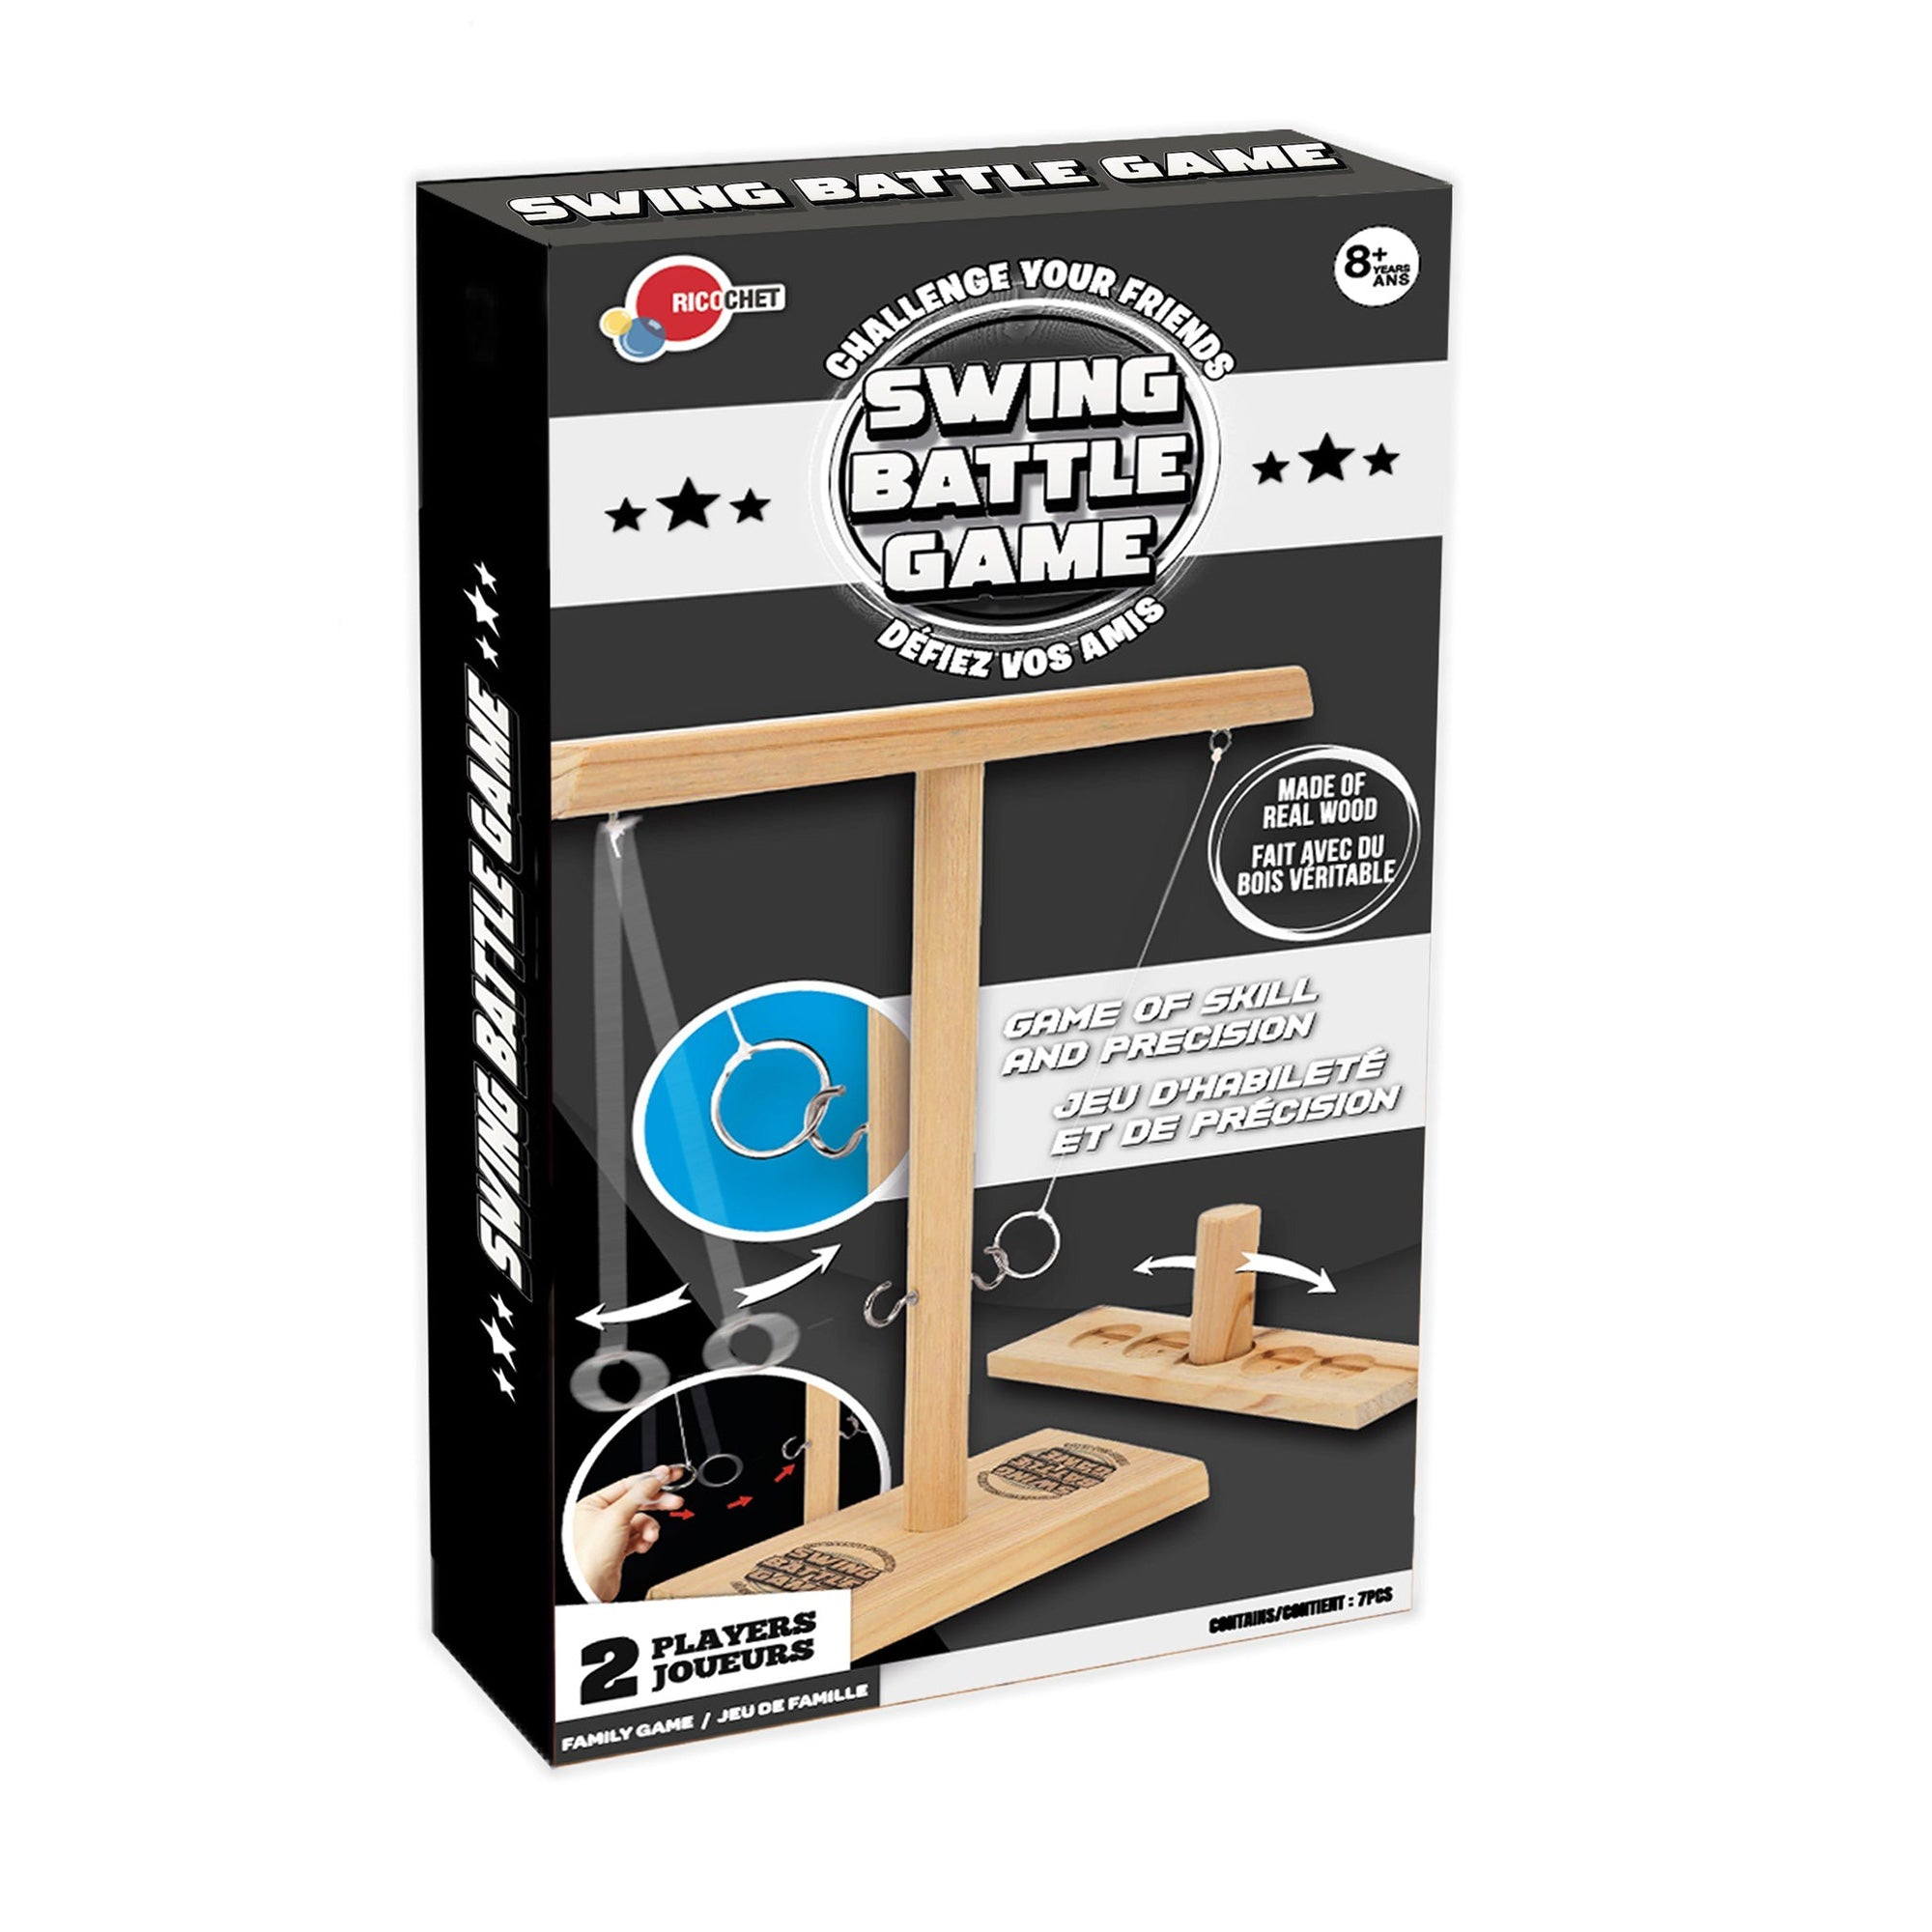 Swing Battle Game, 1 Count